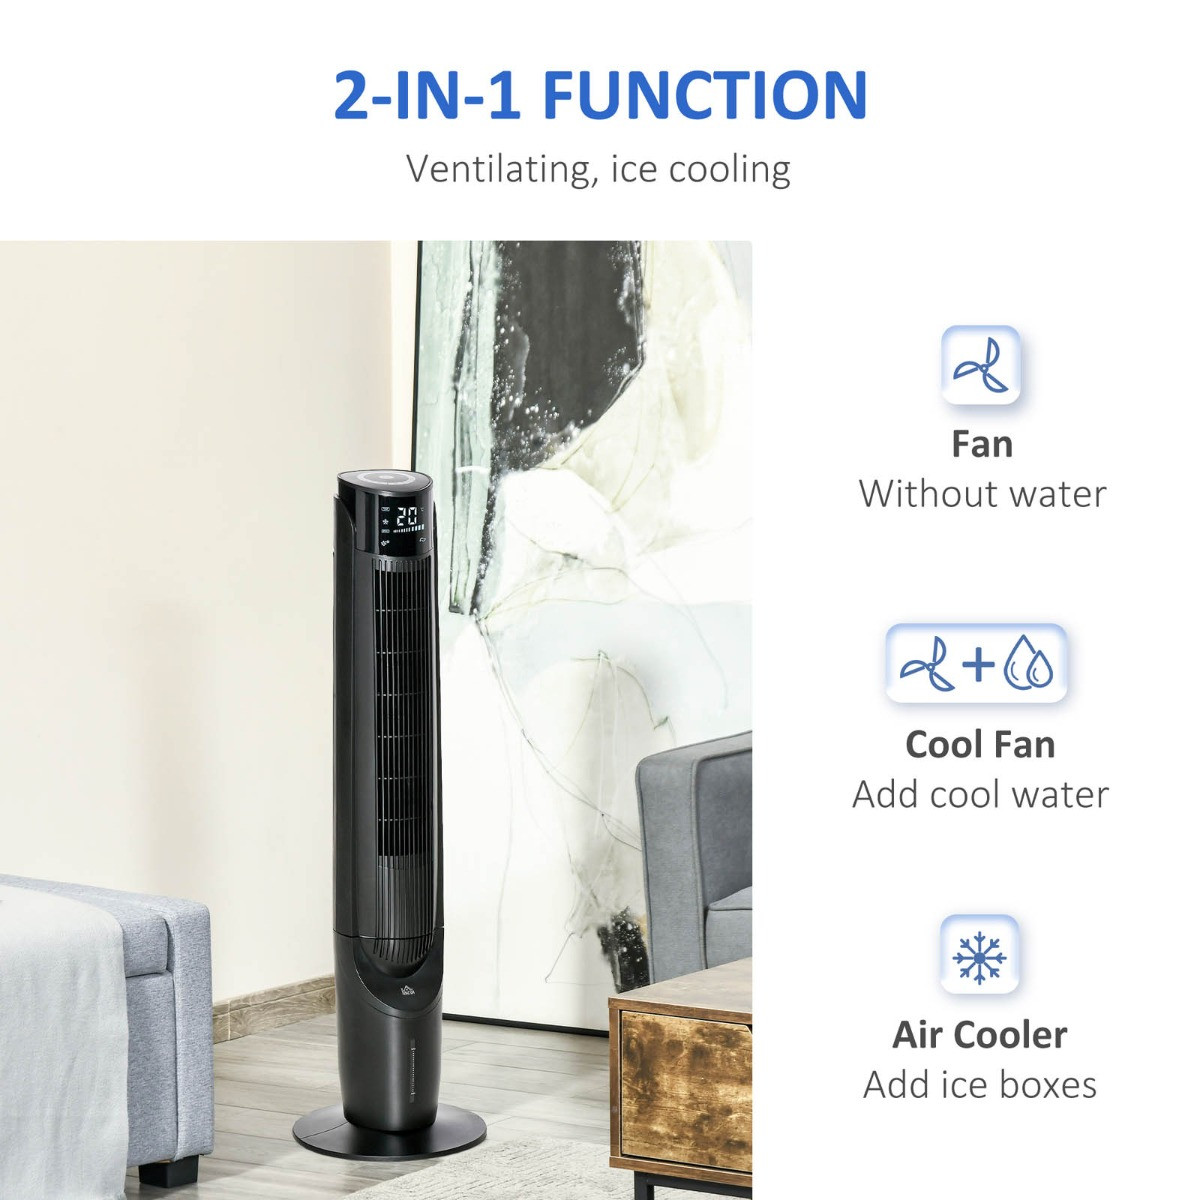 Homcom 42" 4-in-1 Ice Cooling Tower Fan + Water Conditioner - Black>